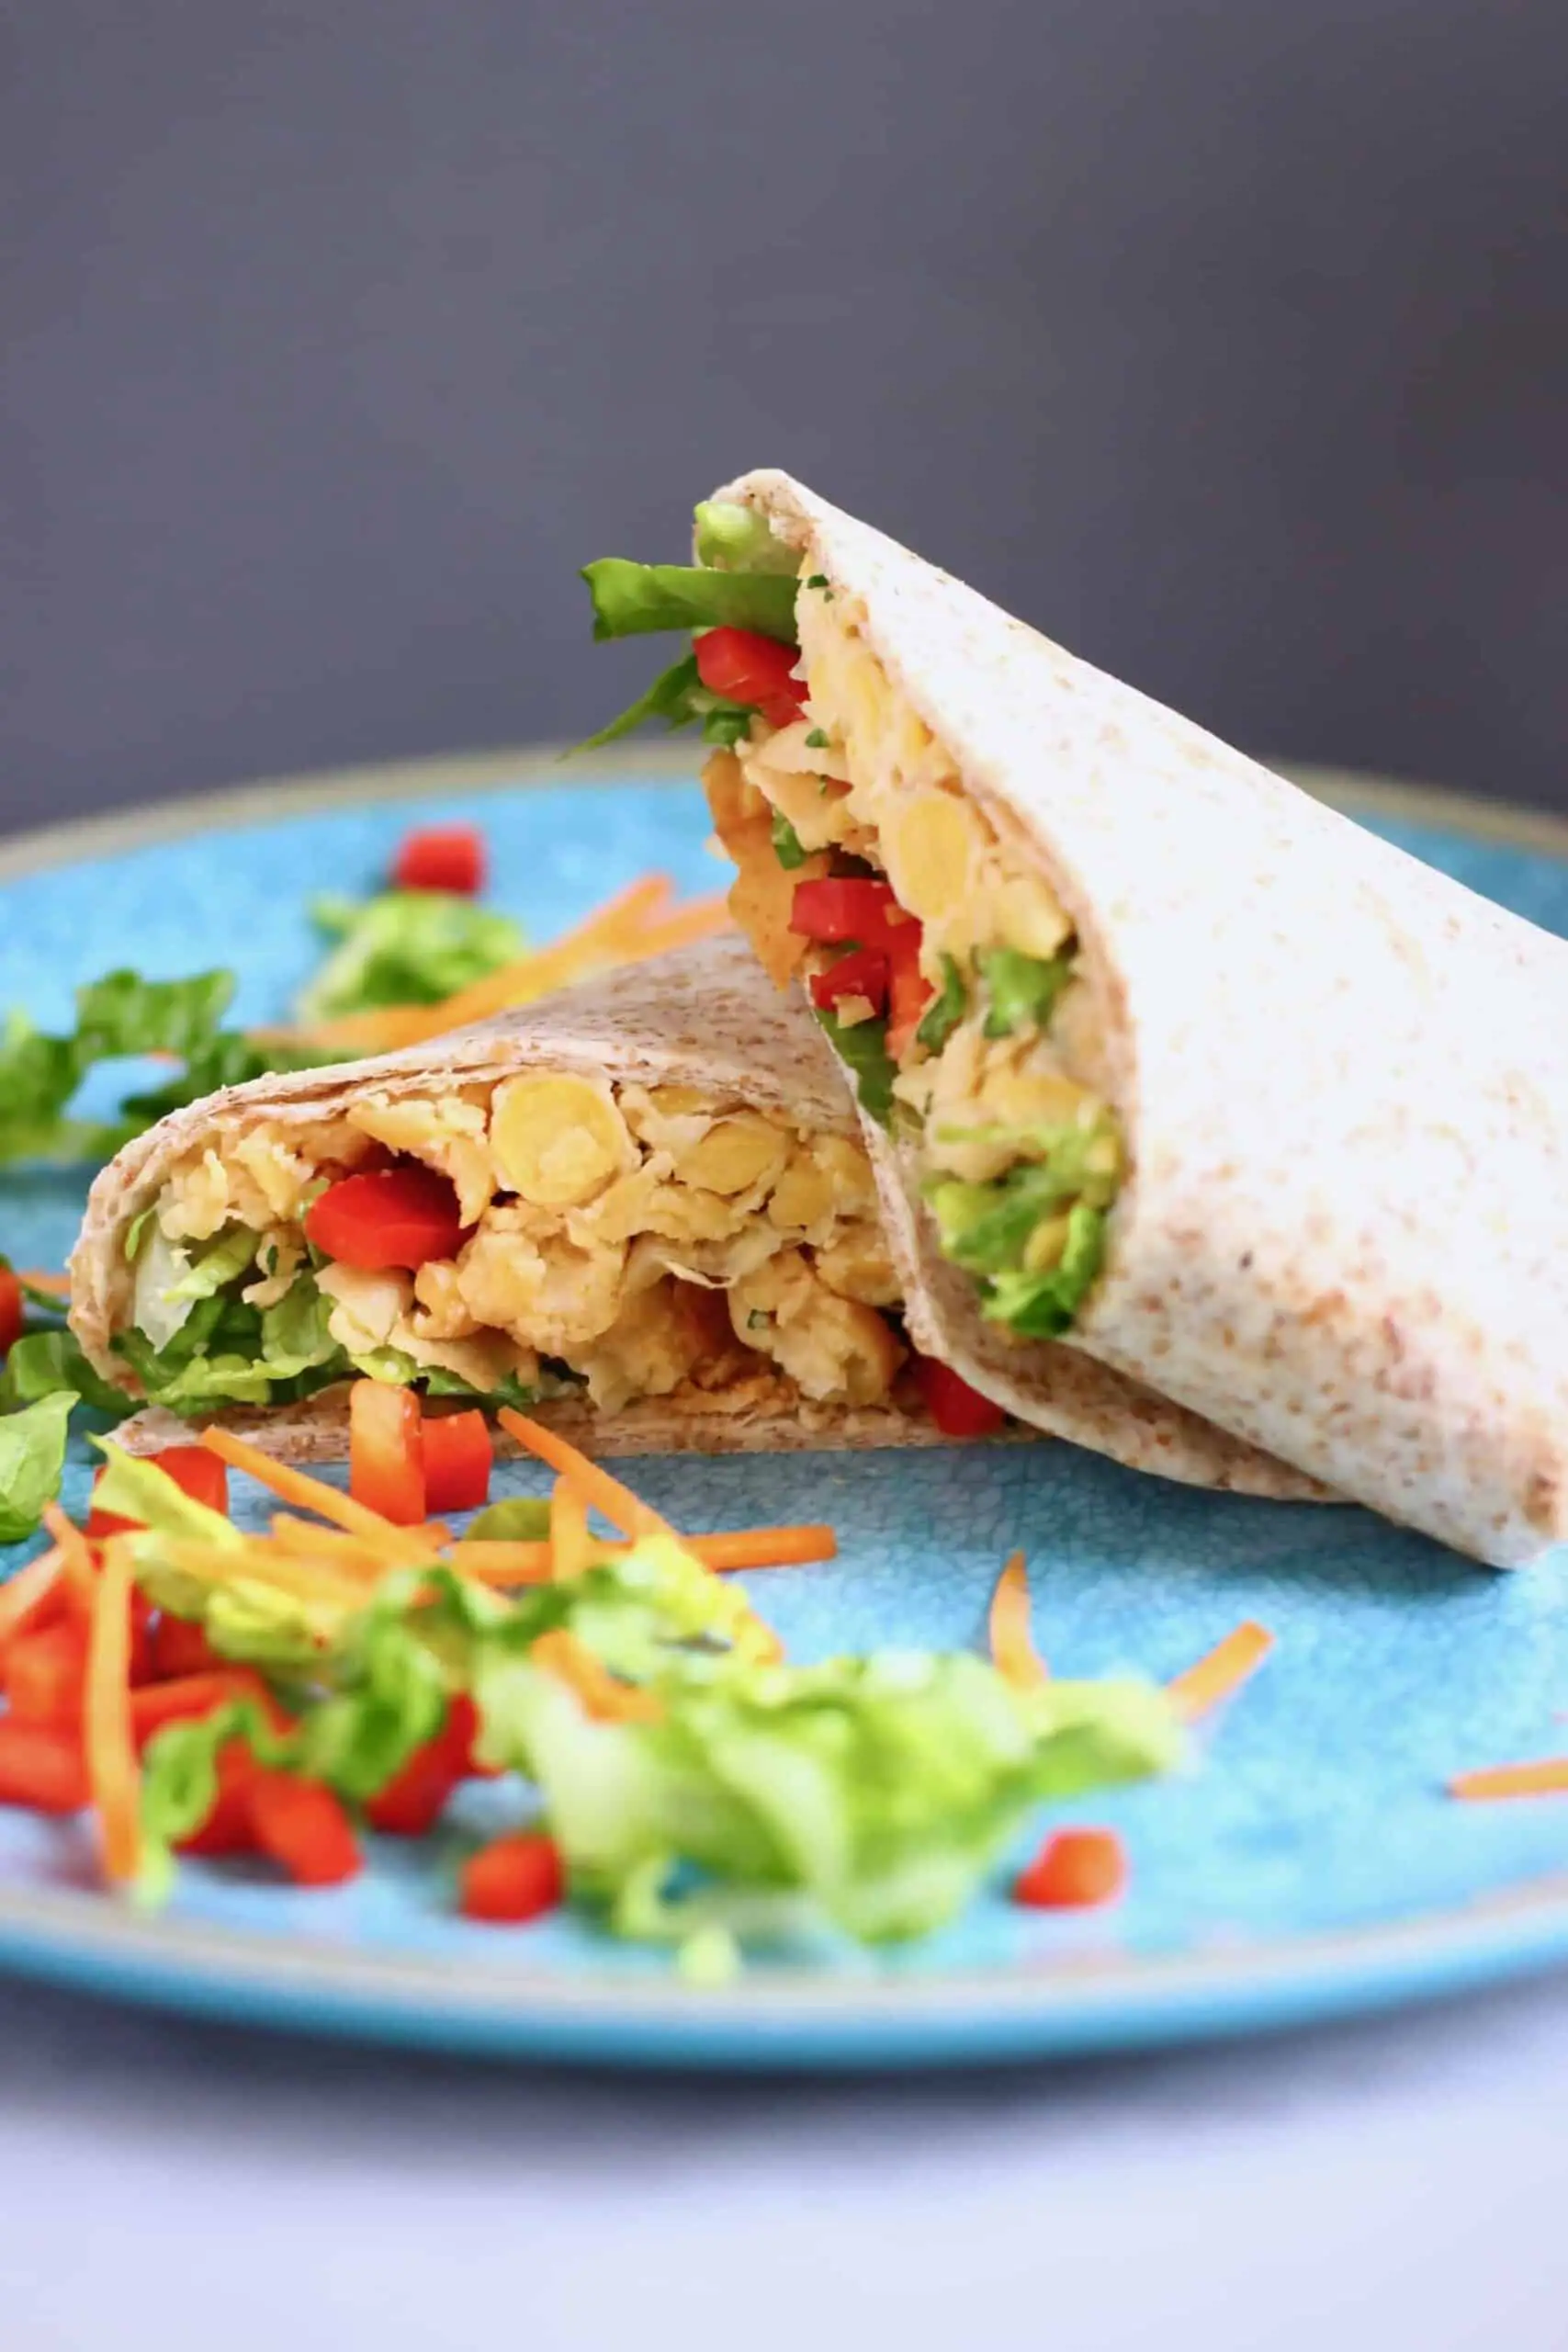 Two wraps filled with chickpeas, lettuce and red pepper on a blue plate against a grey background